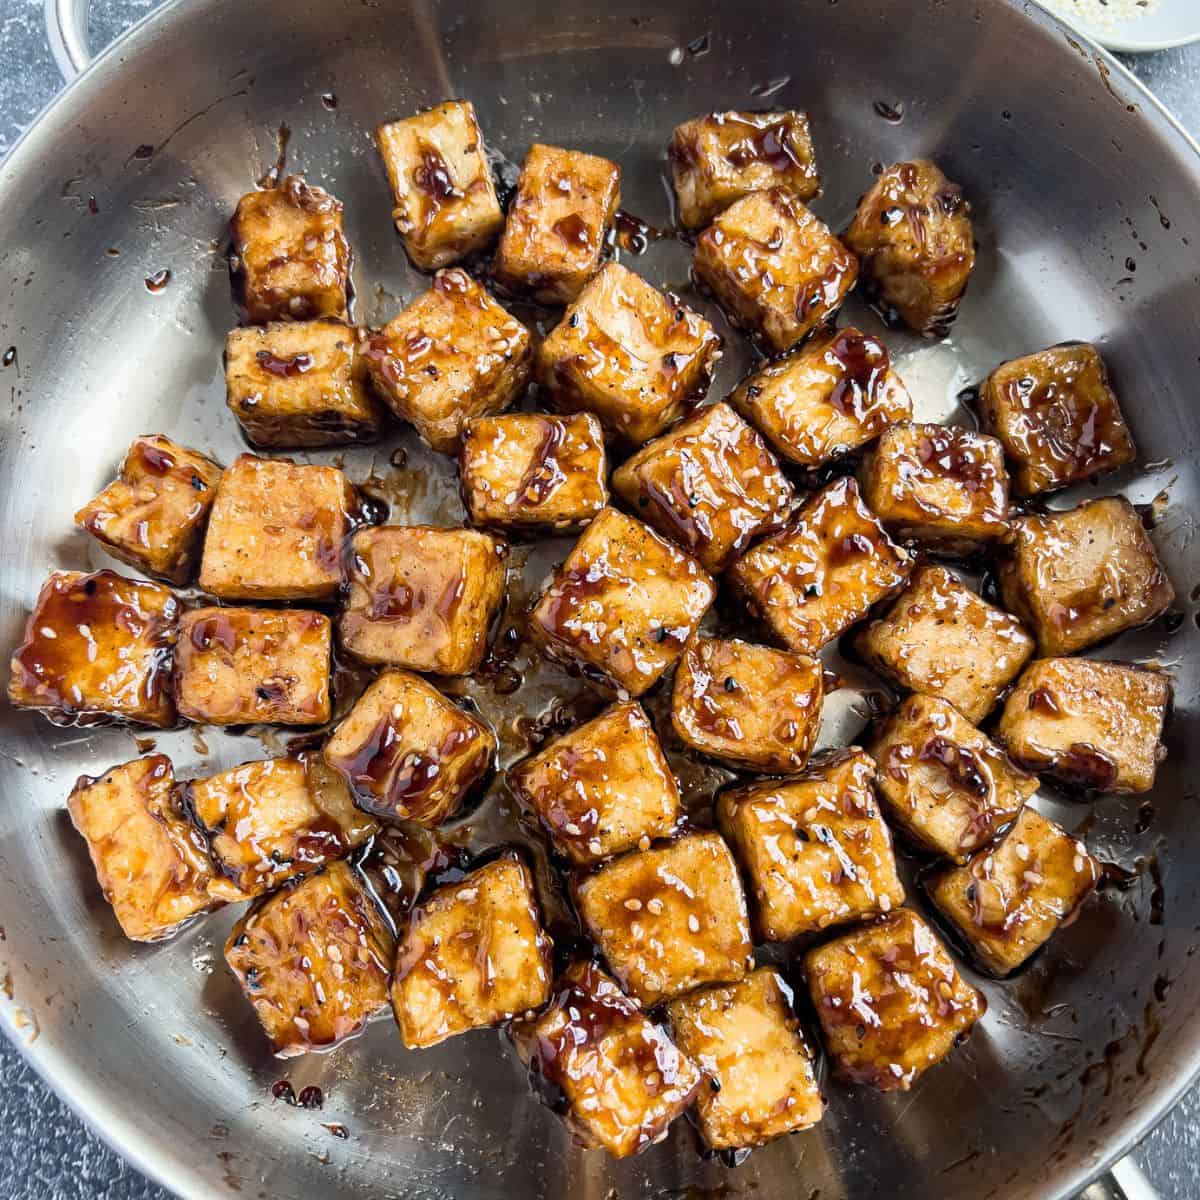 Finish dish of sweet and sticky tofu in a skillet.